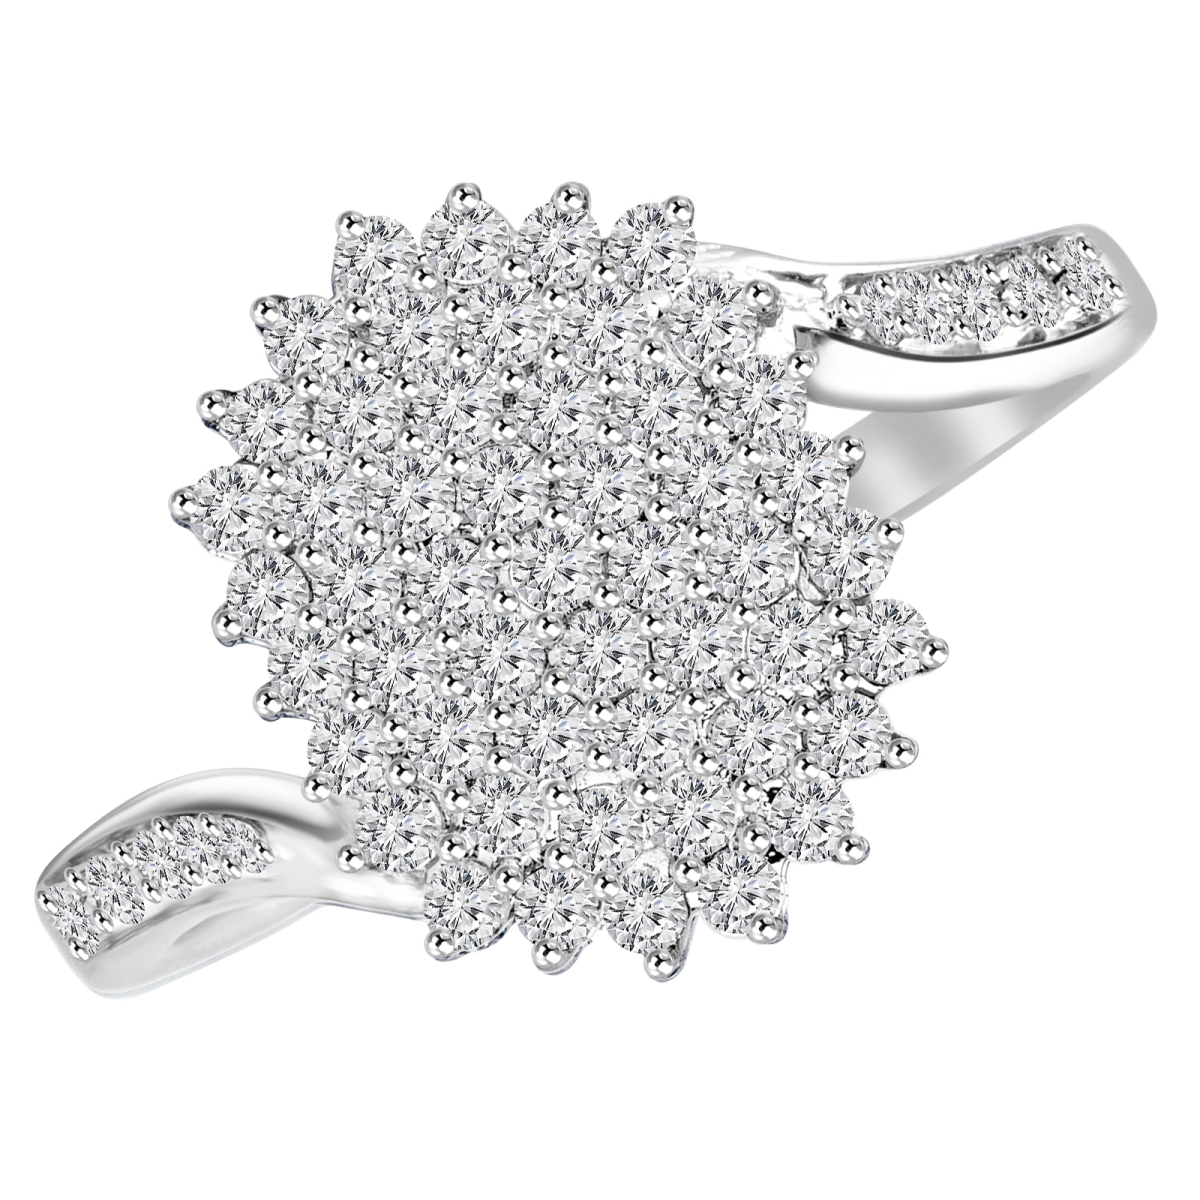 Picture of Majesty Diamonds MDR160007-9 0.5 CTW Round Diamond Cluster Cocktail Ring in 14K White Gold - 9